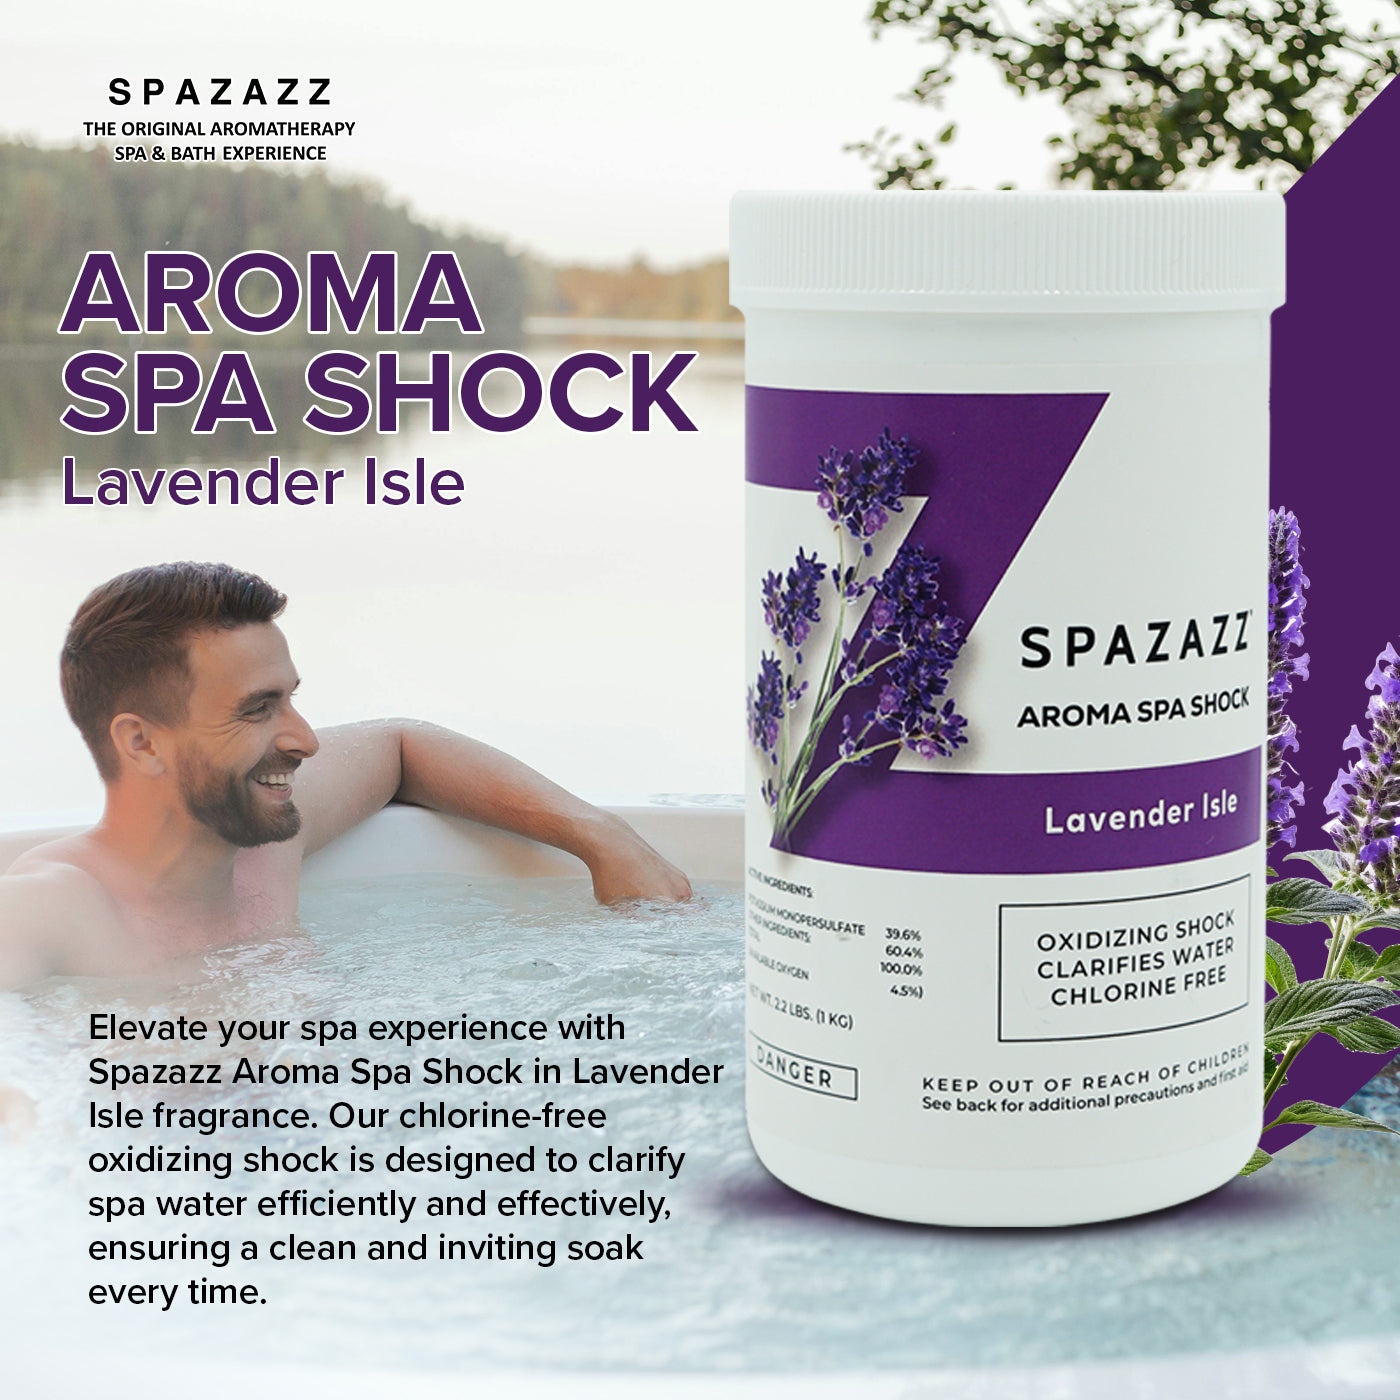 Aroma Spa Shock Lavender Isle - Chlorine-Free Oxidizing Shock for Spa Water Clarification with Scoop - Professional Grade Formula